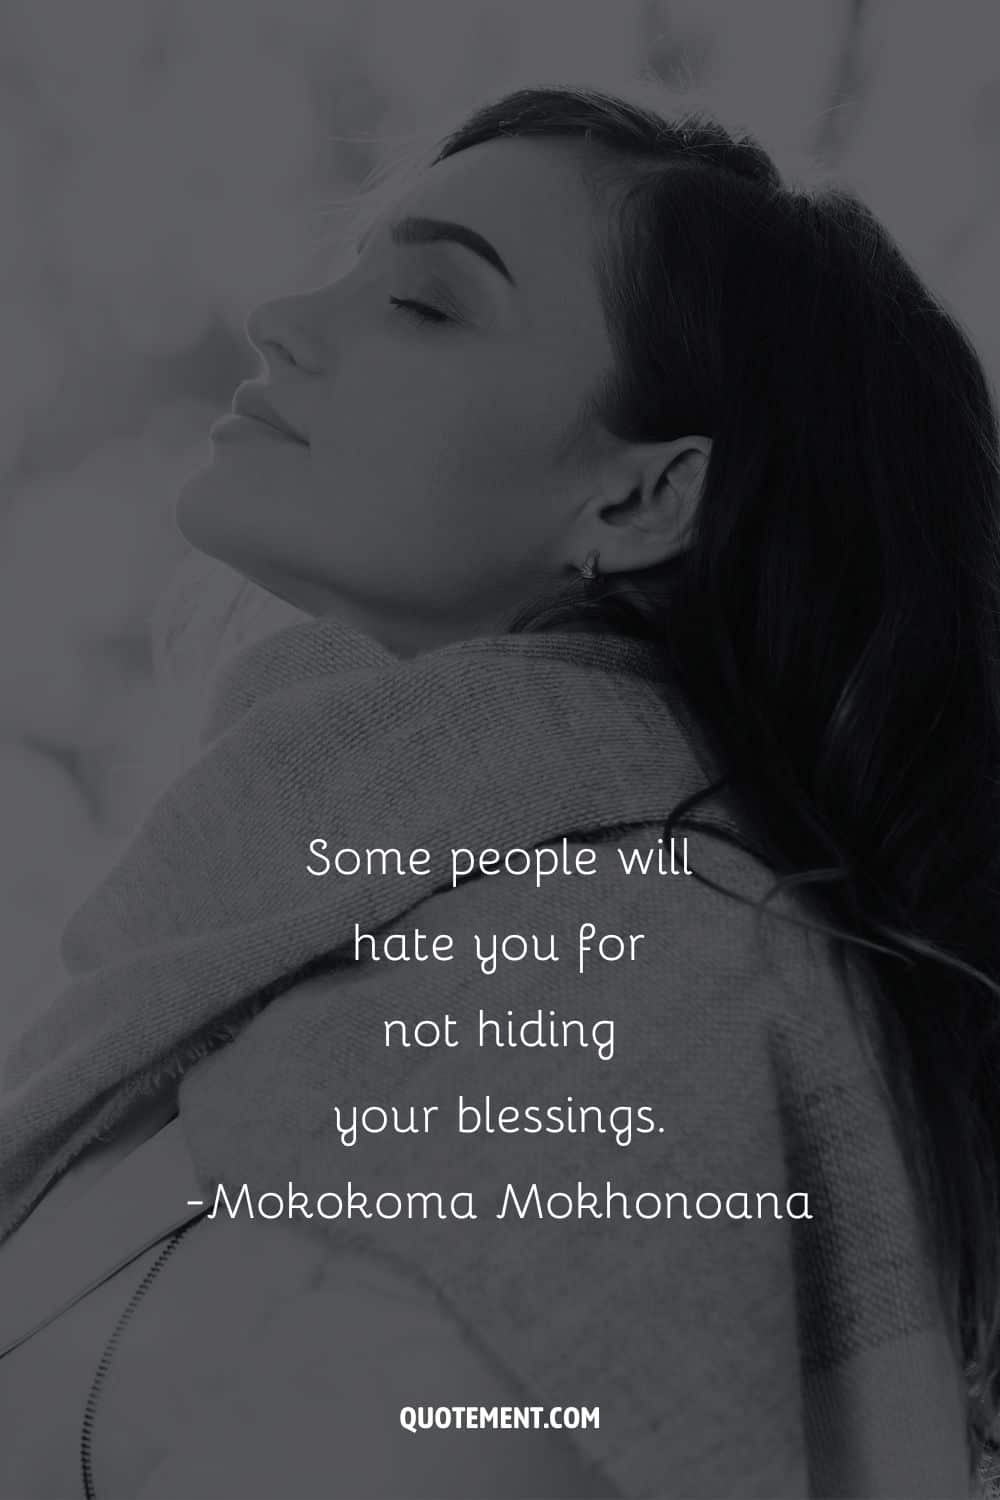 Some people will hate you for not hiding your blessings